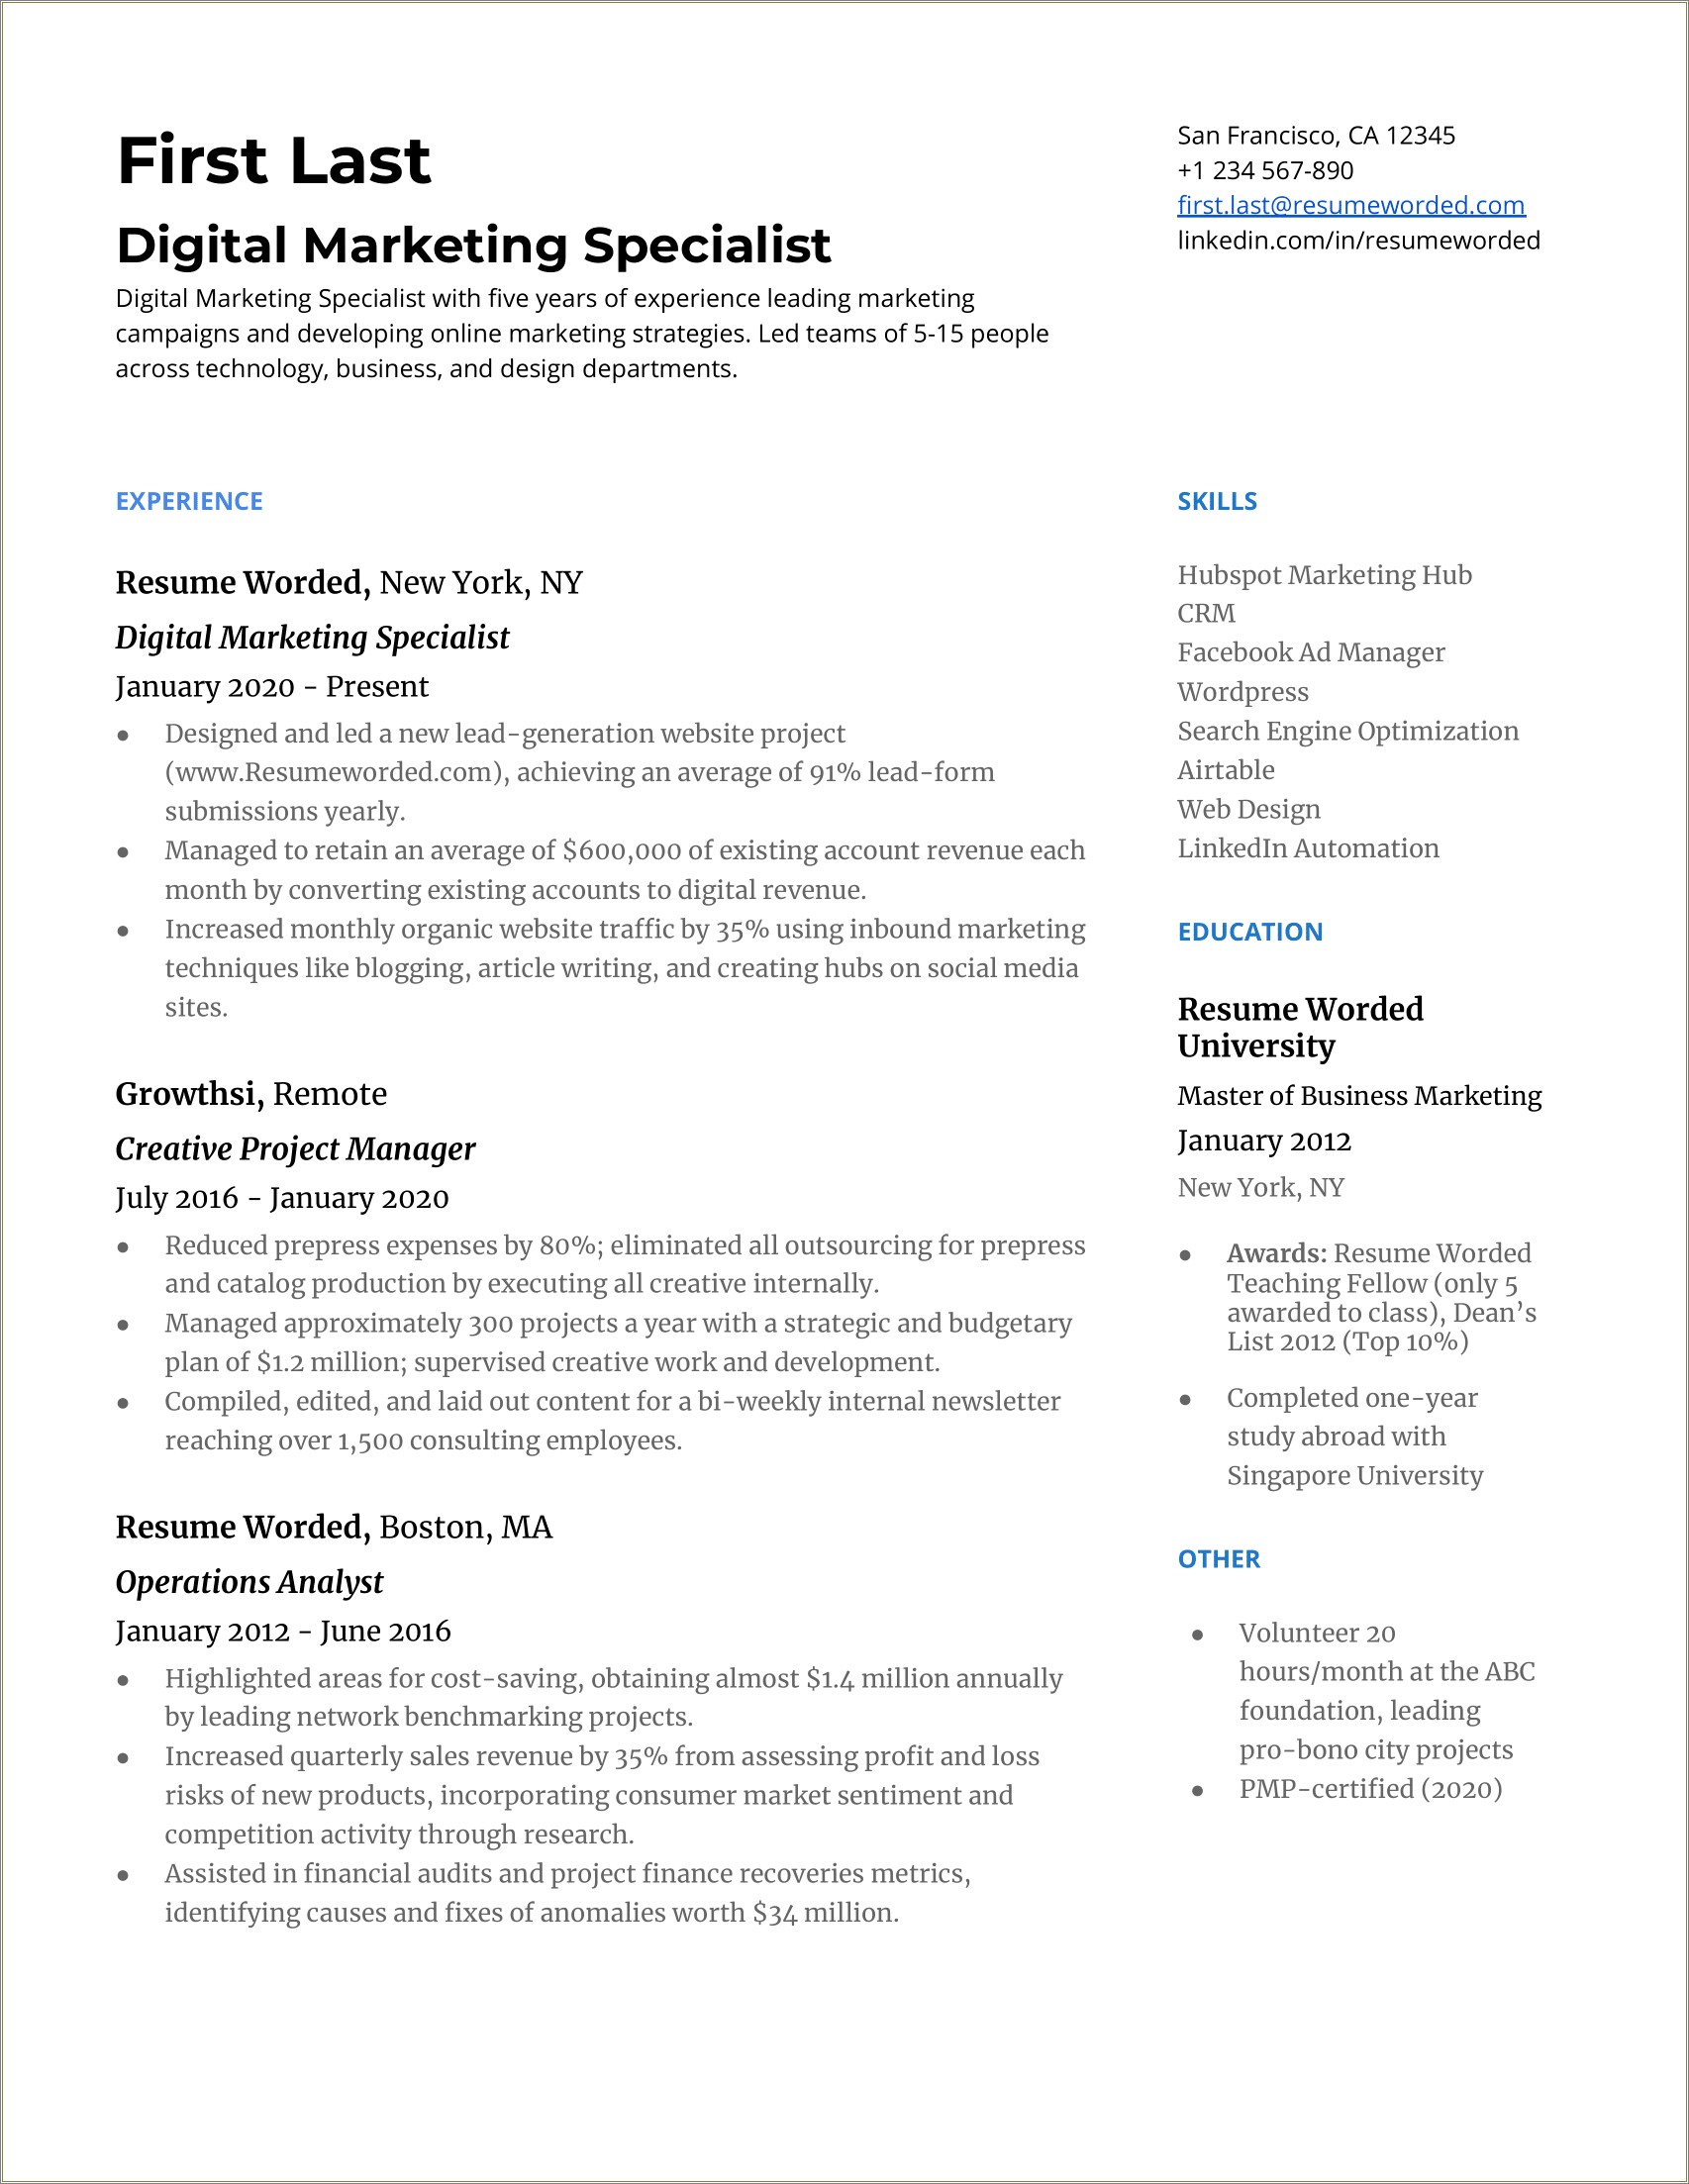 Resume Example With 5 Years Experience